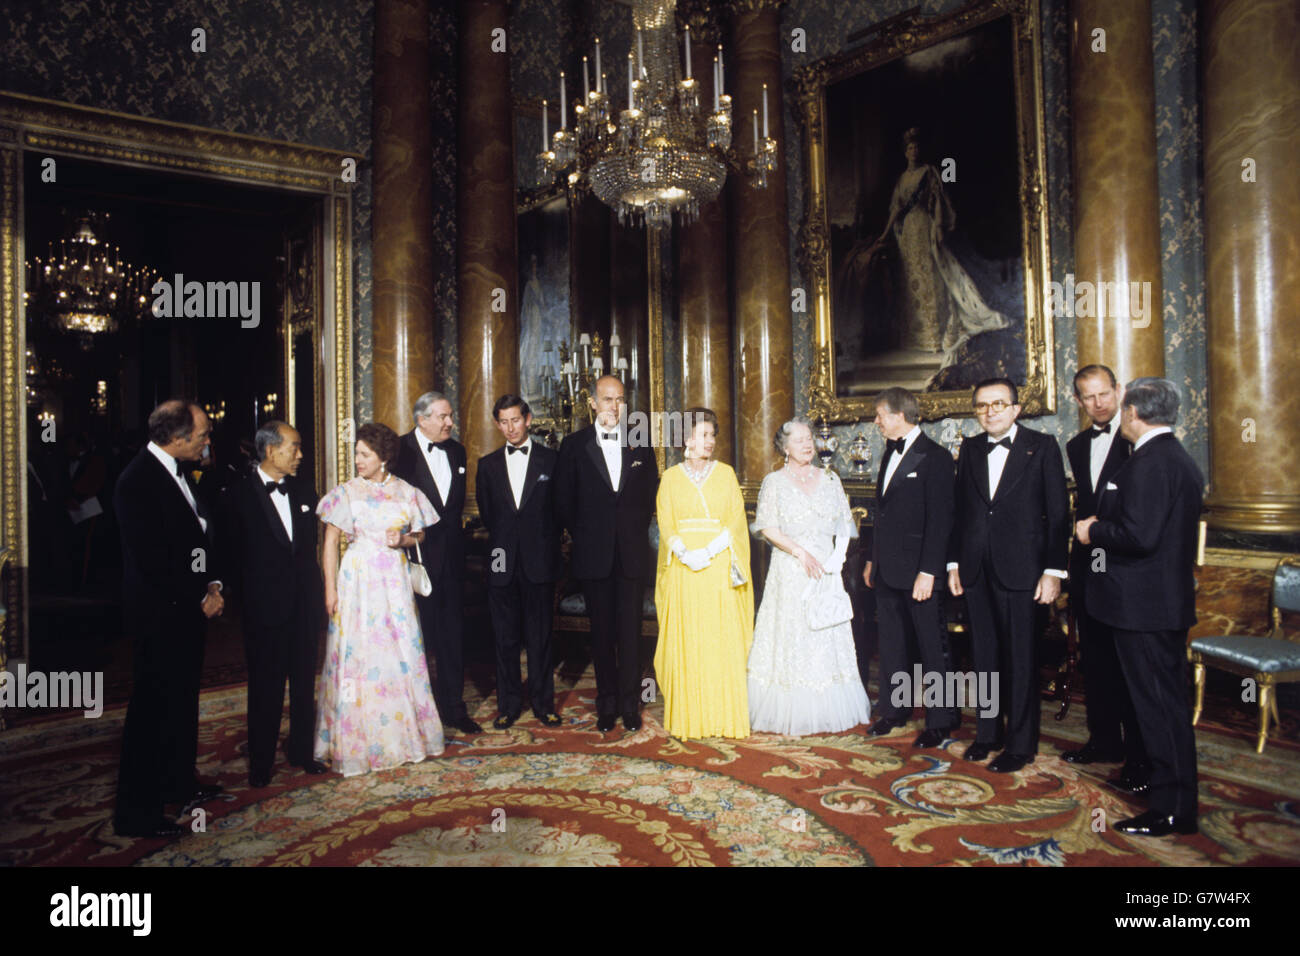 The Queen and members of the Royal Family in the Blue Drawing Room at Buckingham Palace, as they entertained seven world leaders in London for the Downing Street Summit talks. (l-r) Pierre Trudeau (Canada), Takeo Fukuda (Japan), Princess Margaret, James Callaghan, Prince Charles, Giscard d'Estaing (France), Queen Elizabeth II, the Queen Mother, President Carter (USA), Giulio Andreotti (Italy), Prince Philip and Helmut Schmidt (West Germany.) Stock Photo